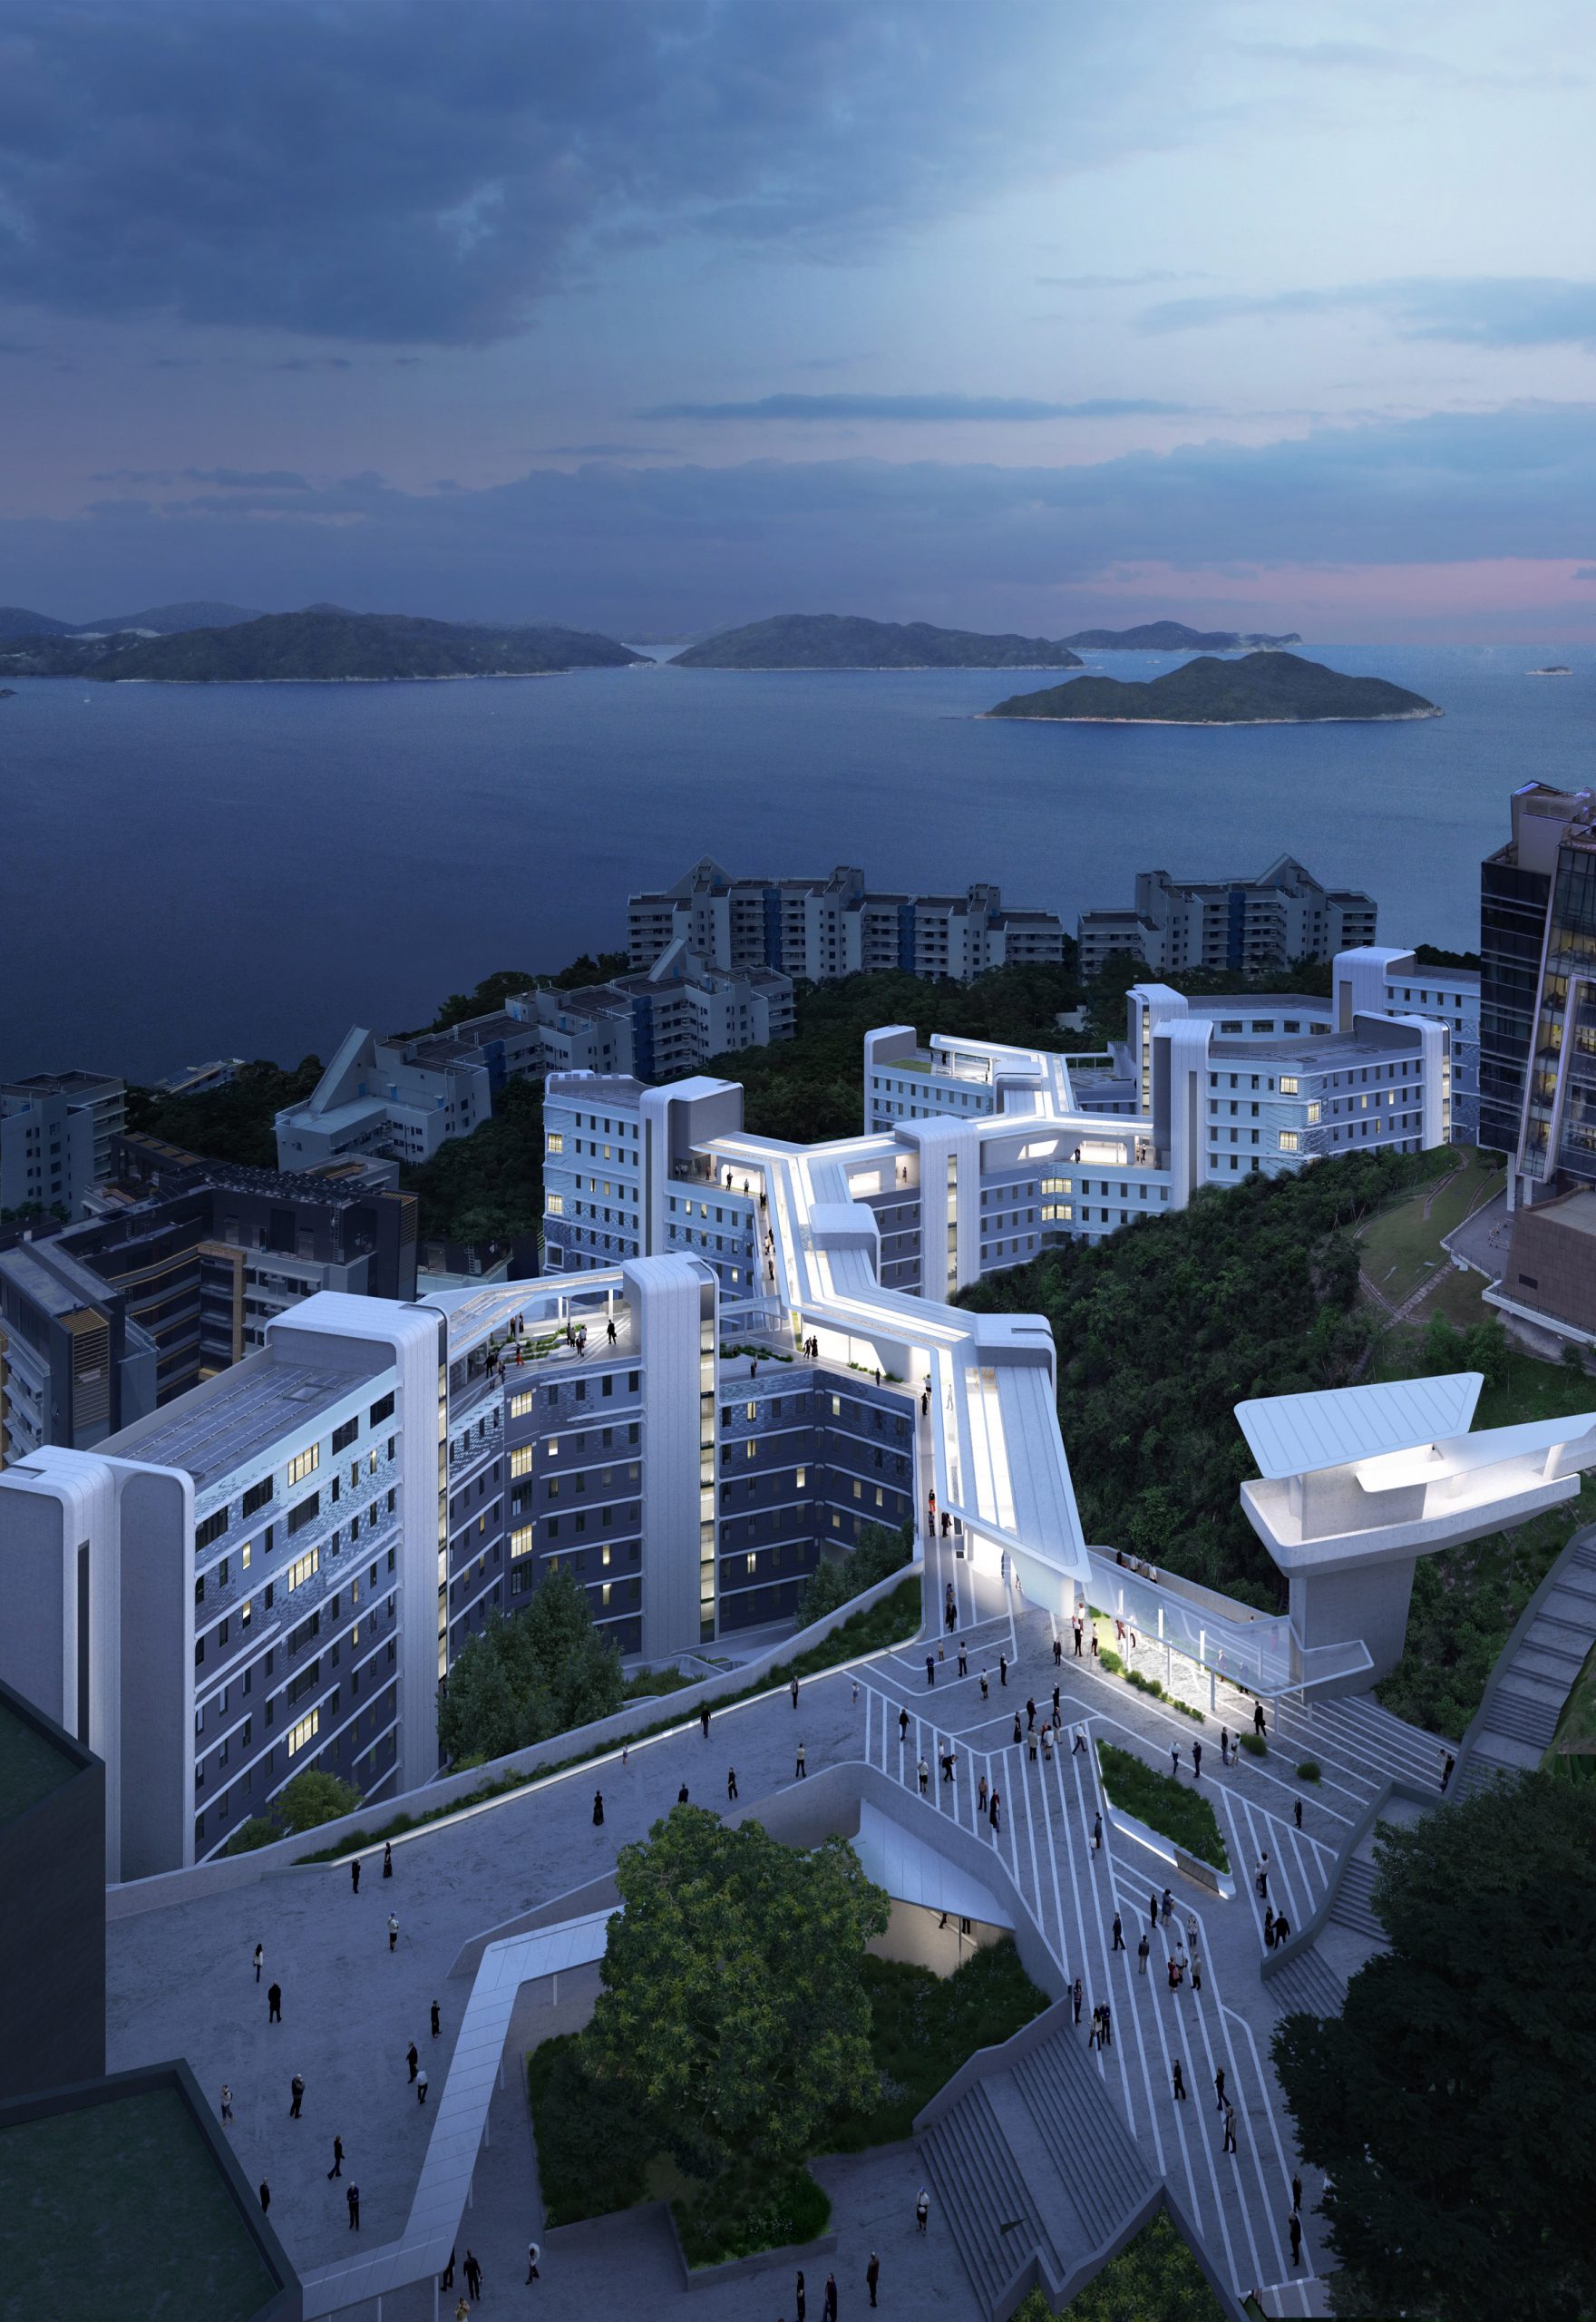 The rooftop walkway of the Student Residence Development at HKUST by Zaha Hadid Architects